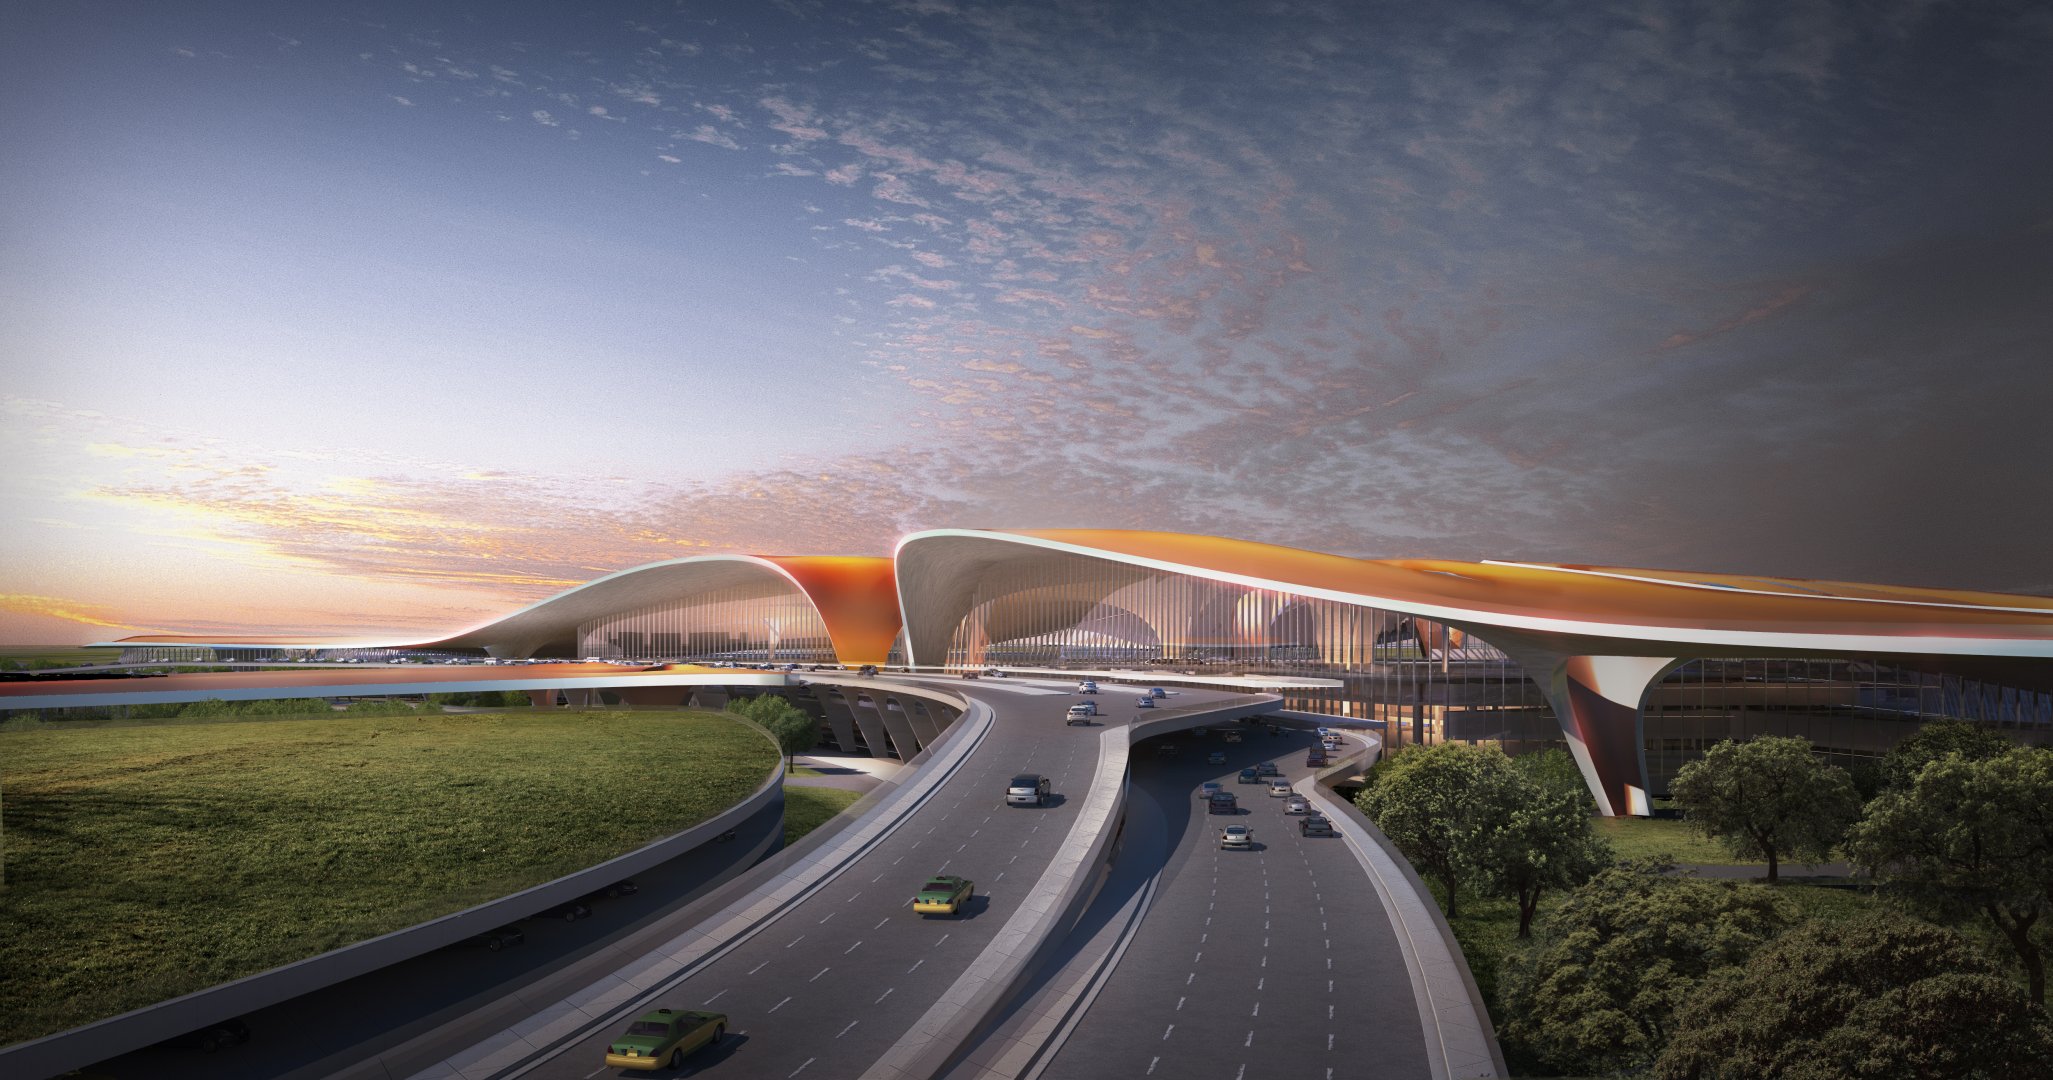 Beijing’s New Airport Terminal Looks More Like A Gigantic Spaceport